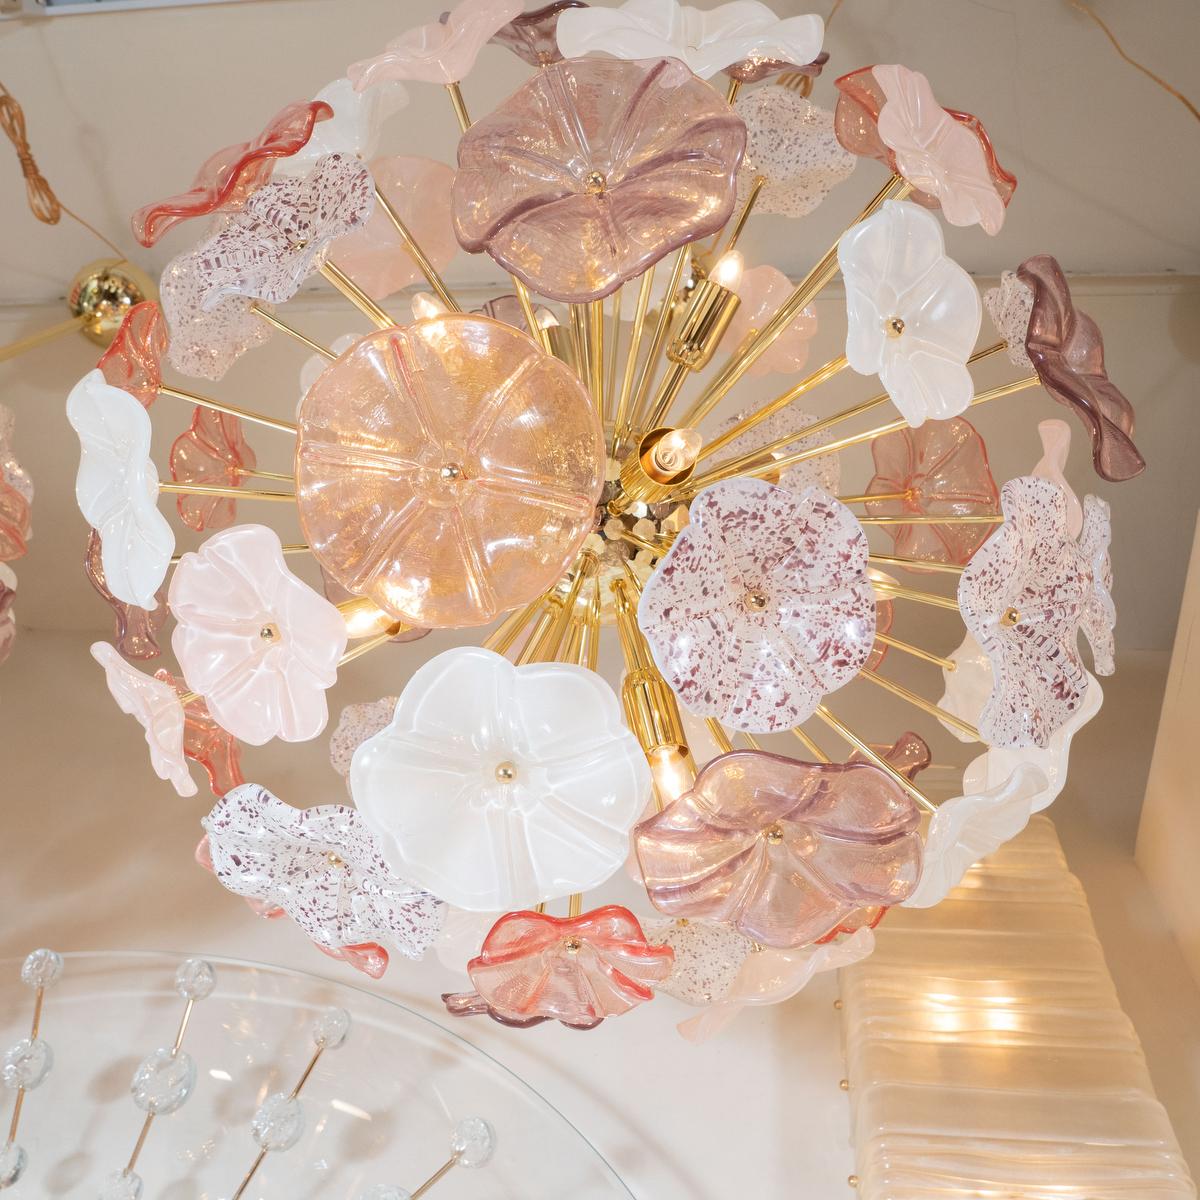 Brass starburst pendant fixture with pink and white glass floral design. 
12 candelabra.